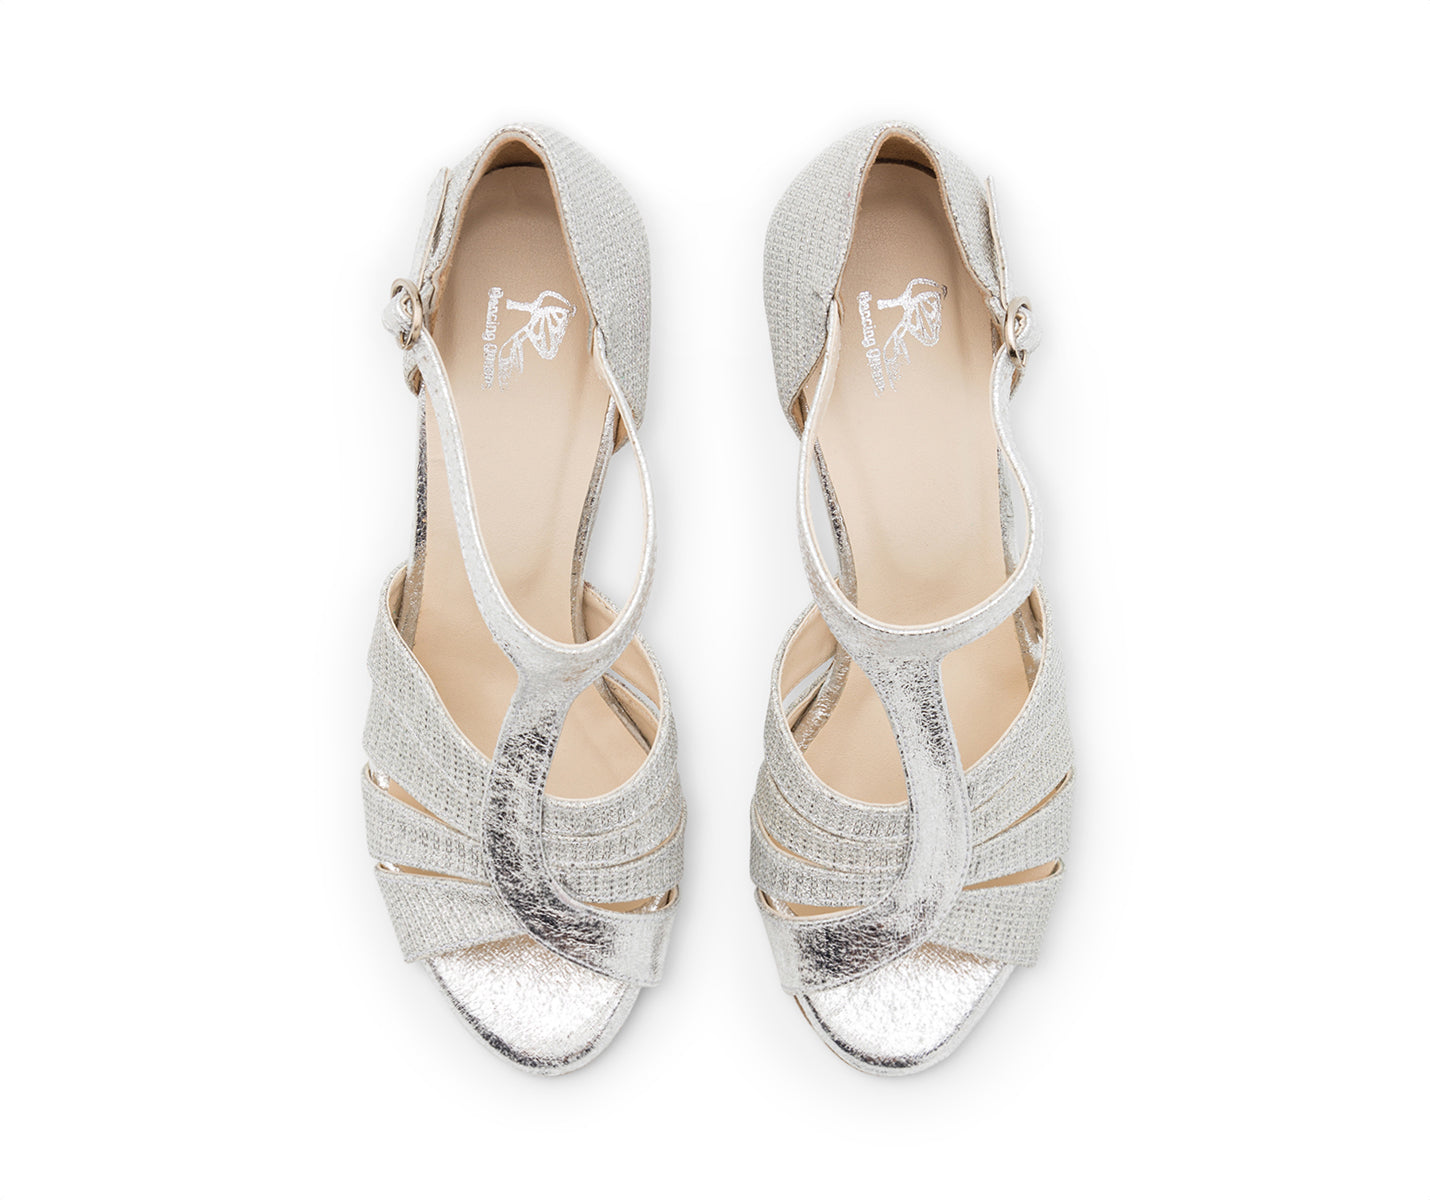 ESP09 dance shoes in silver